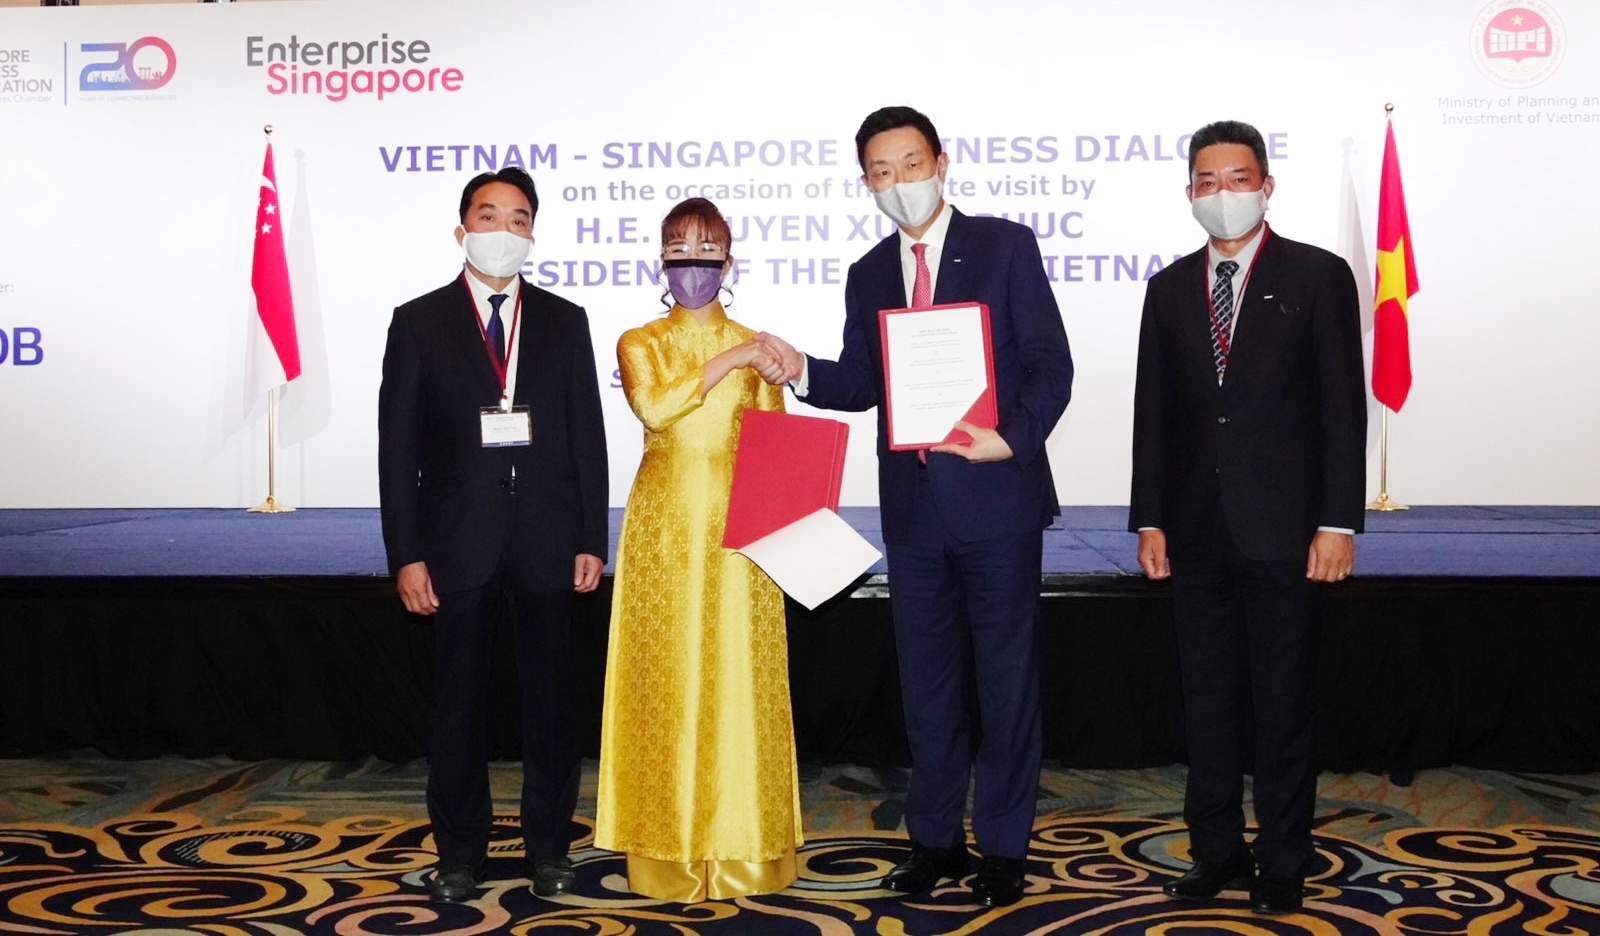 Nguyen Thi Phuong Thao, Sovico Chairwoman, hands over a Memorandum of Understanding to Loh Chin Hua, General Director of Keppel, on developing energy solutions and sustainable urbanization in Vietnam. Photo by Sovico